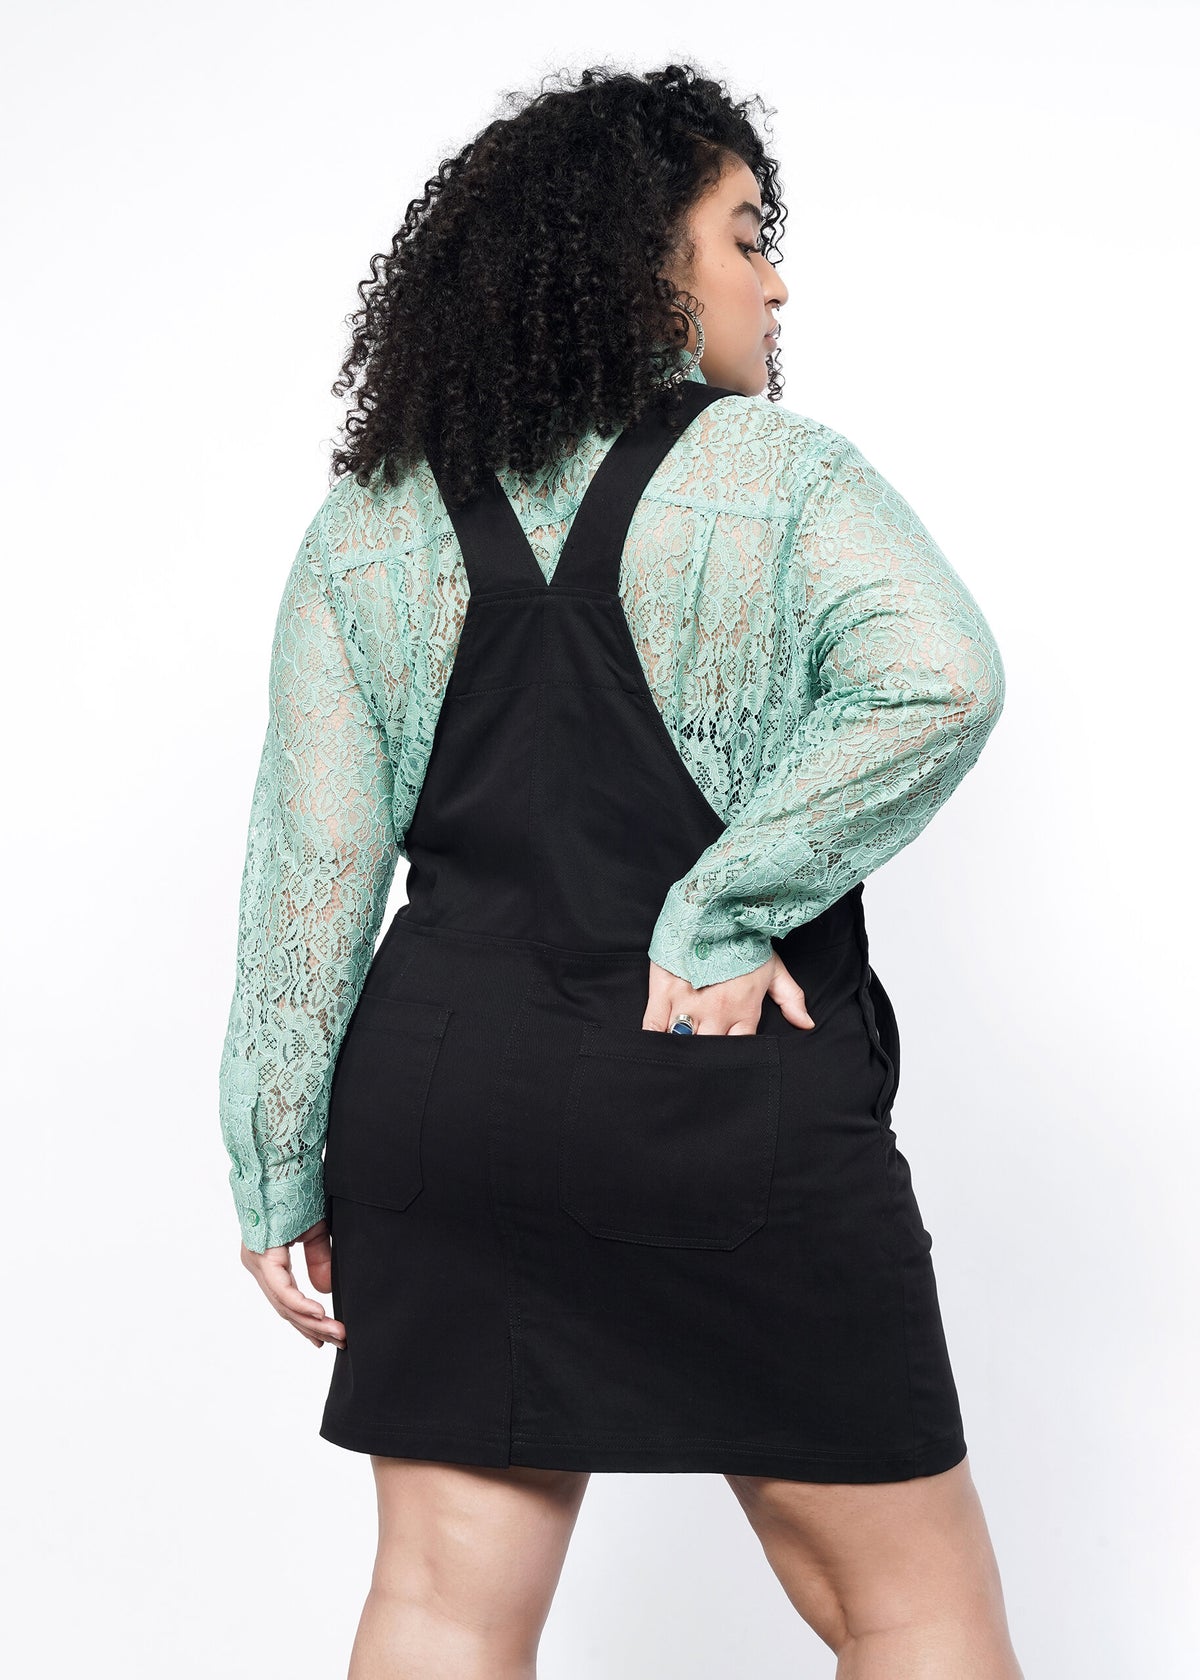 Back image of Model wearing the Essential Skirtall in Black size XL, with a Long Sleeve Lace Button Up in Sage